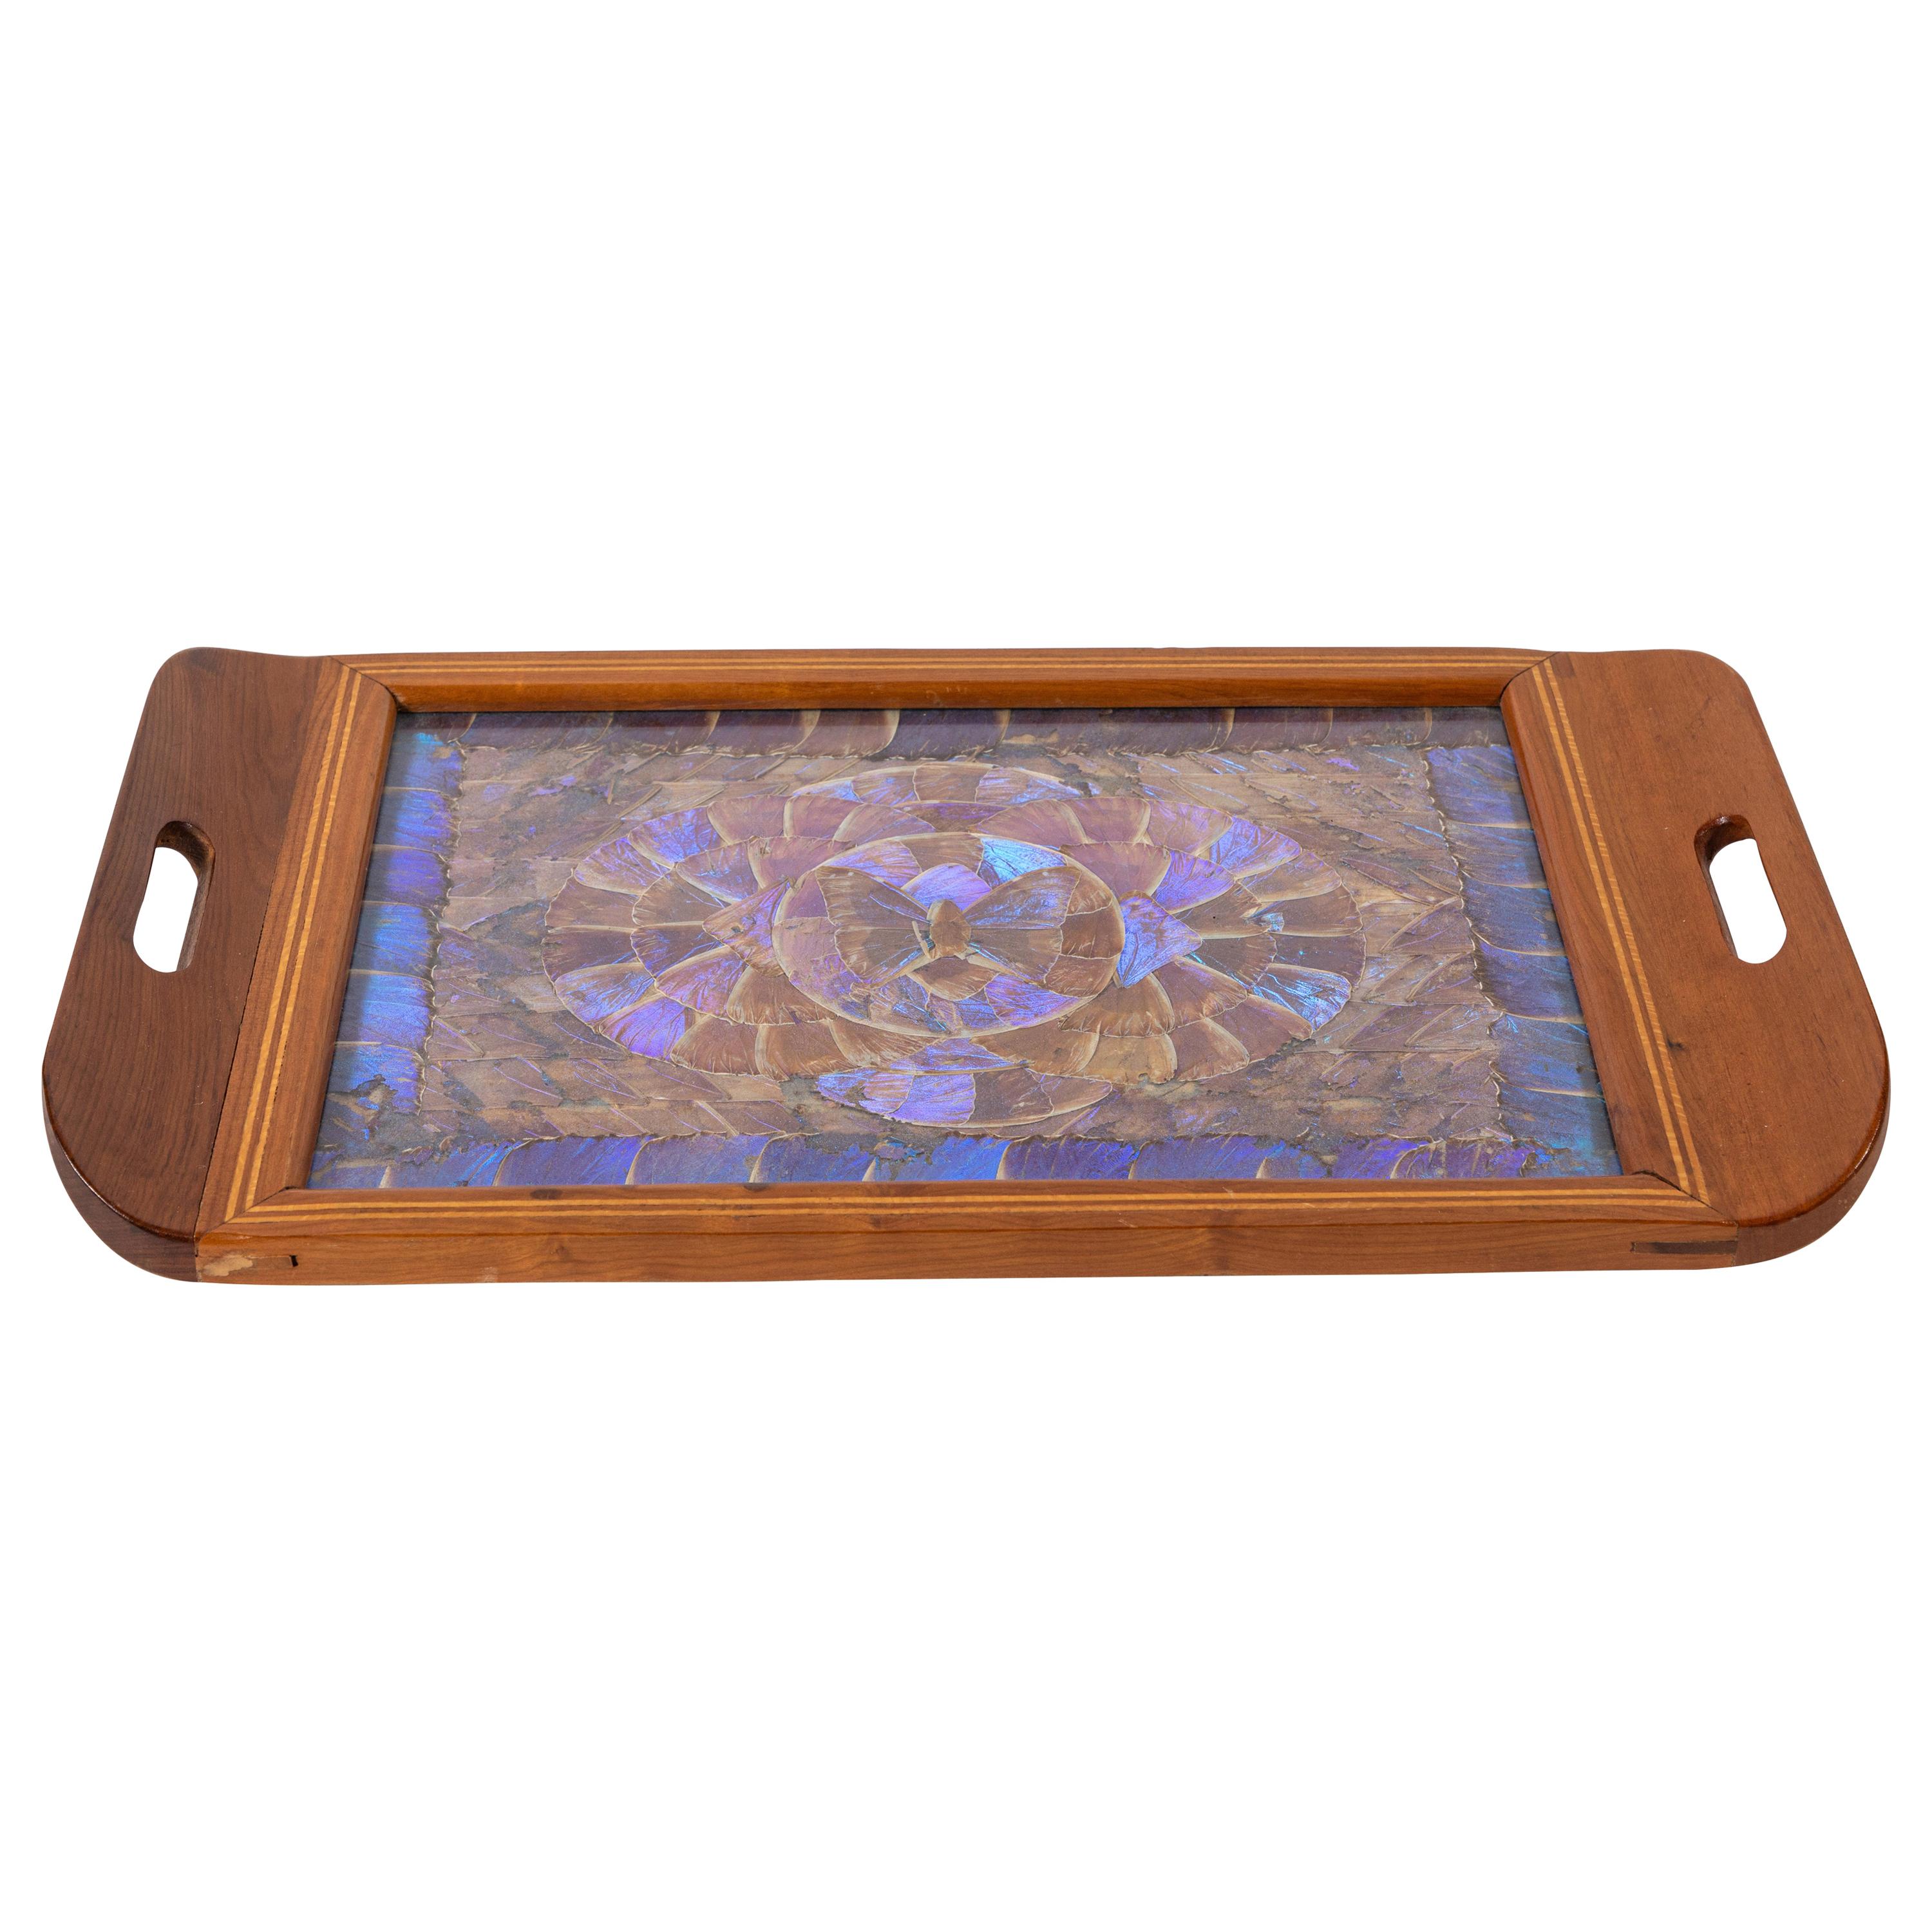 Vintage Inlaid Wood Tray with Morpho Butterfly Wings, circa 1940s